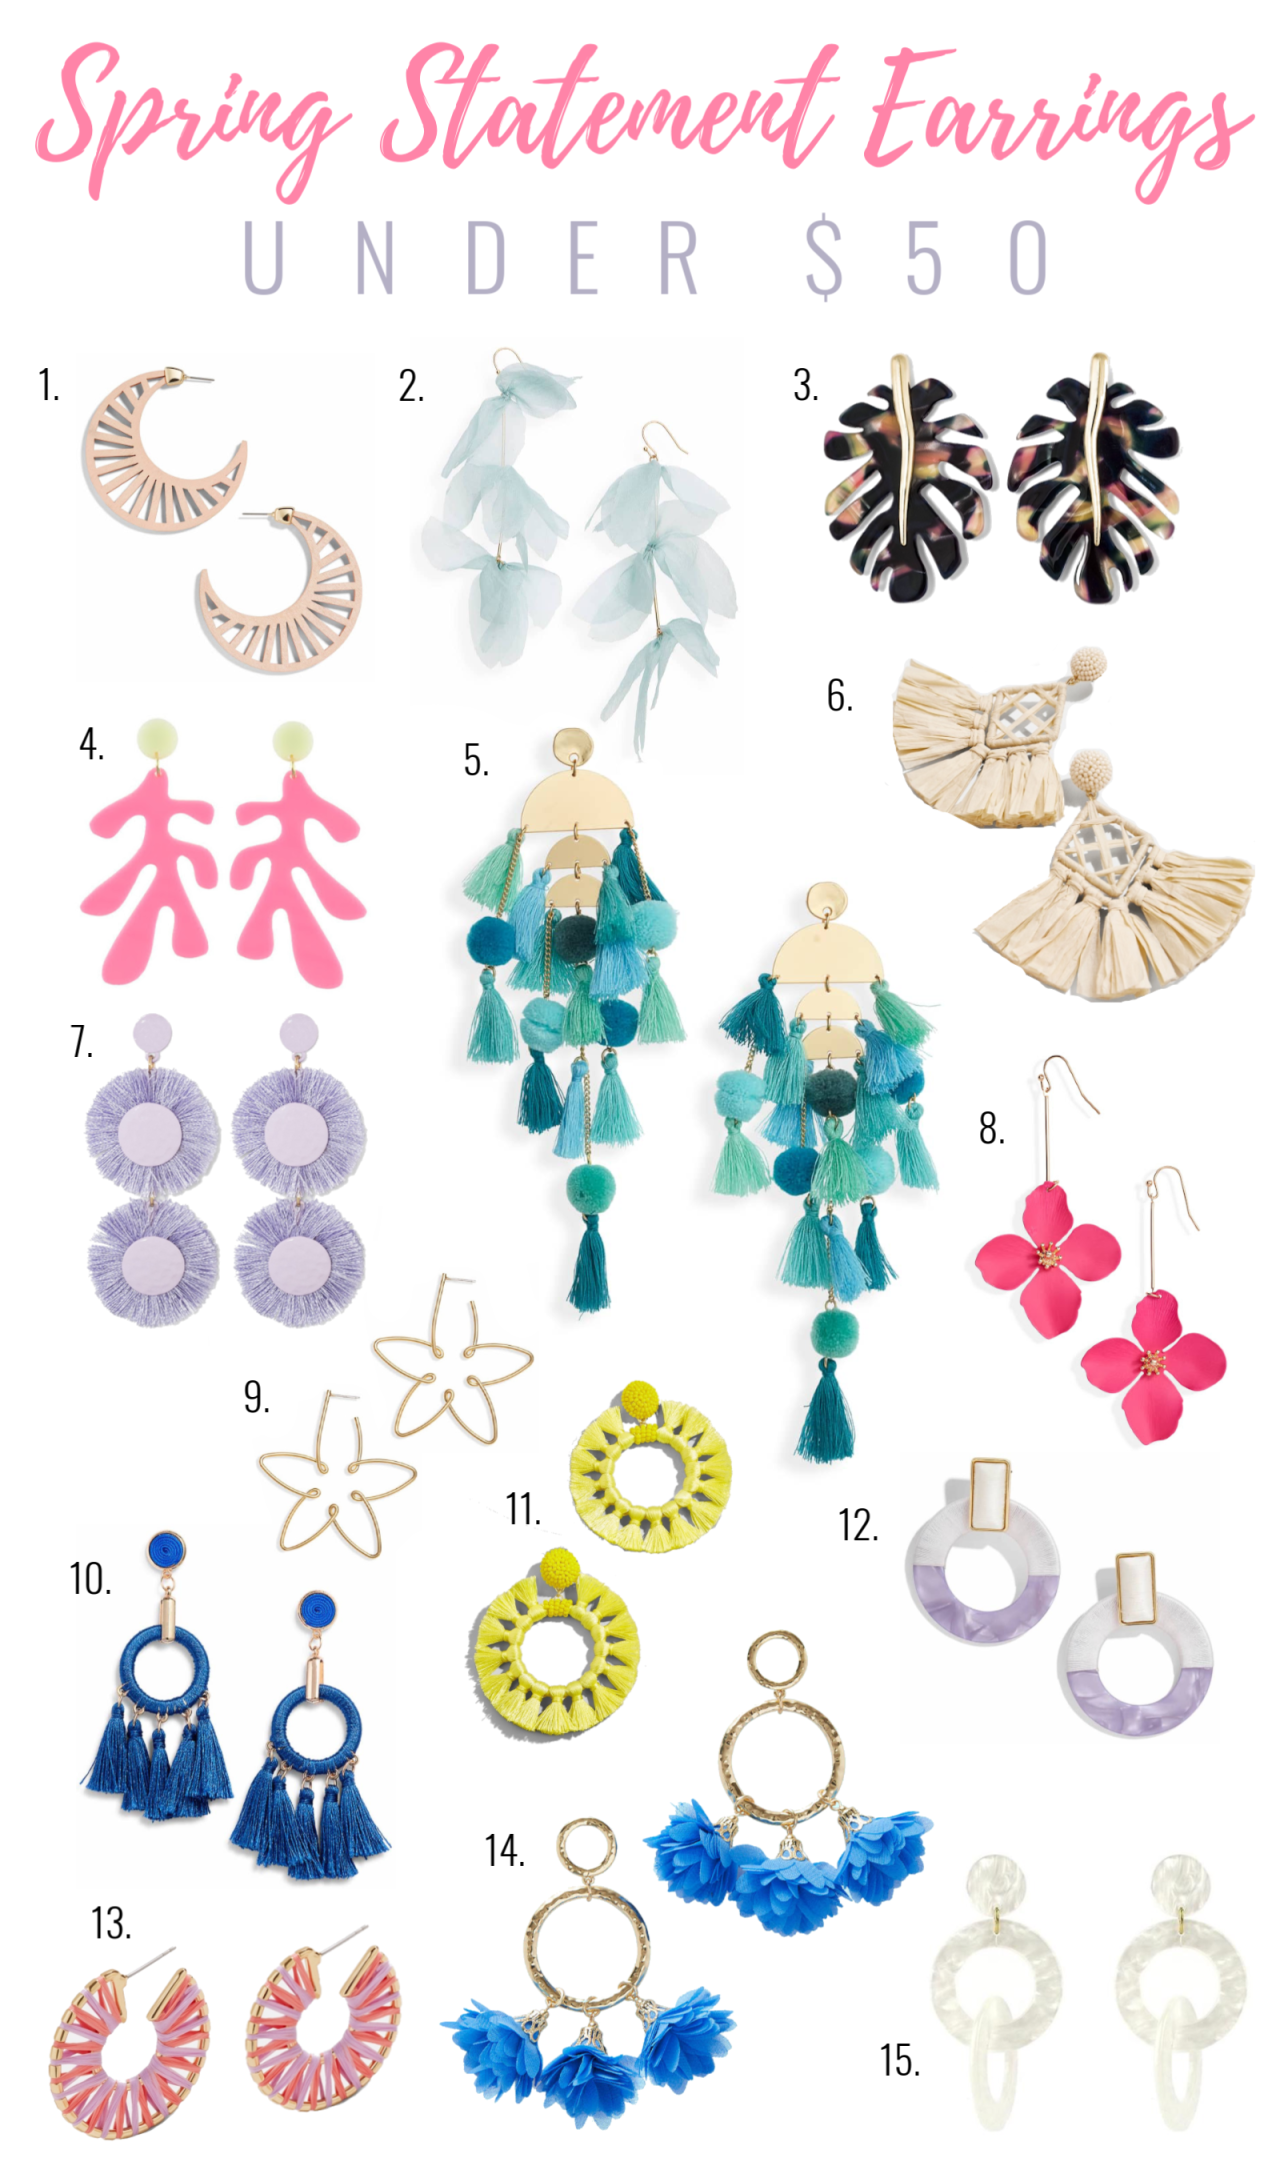 Spring Statement Earrings Under $50, affordable statement earrings